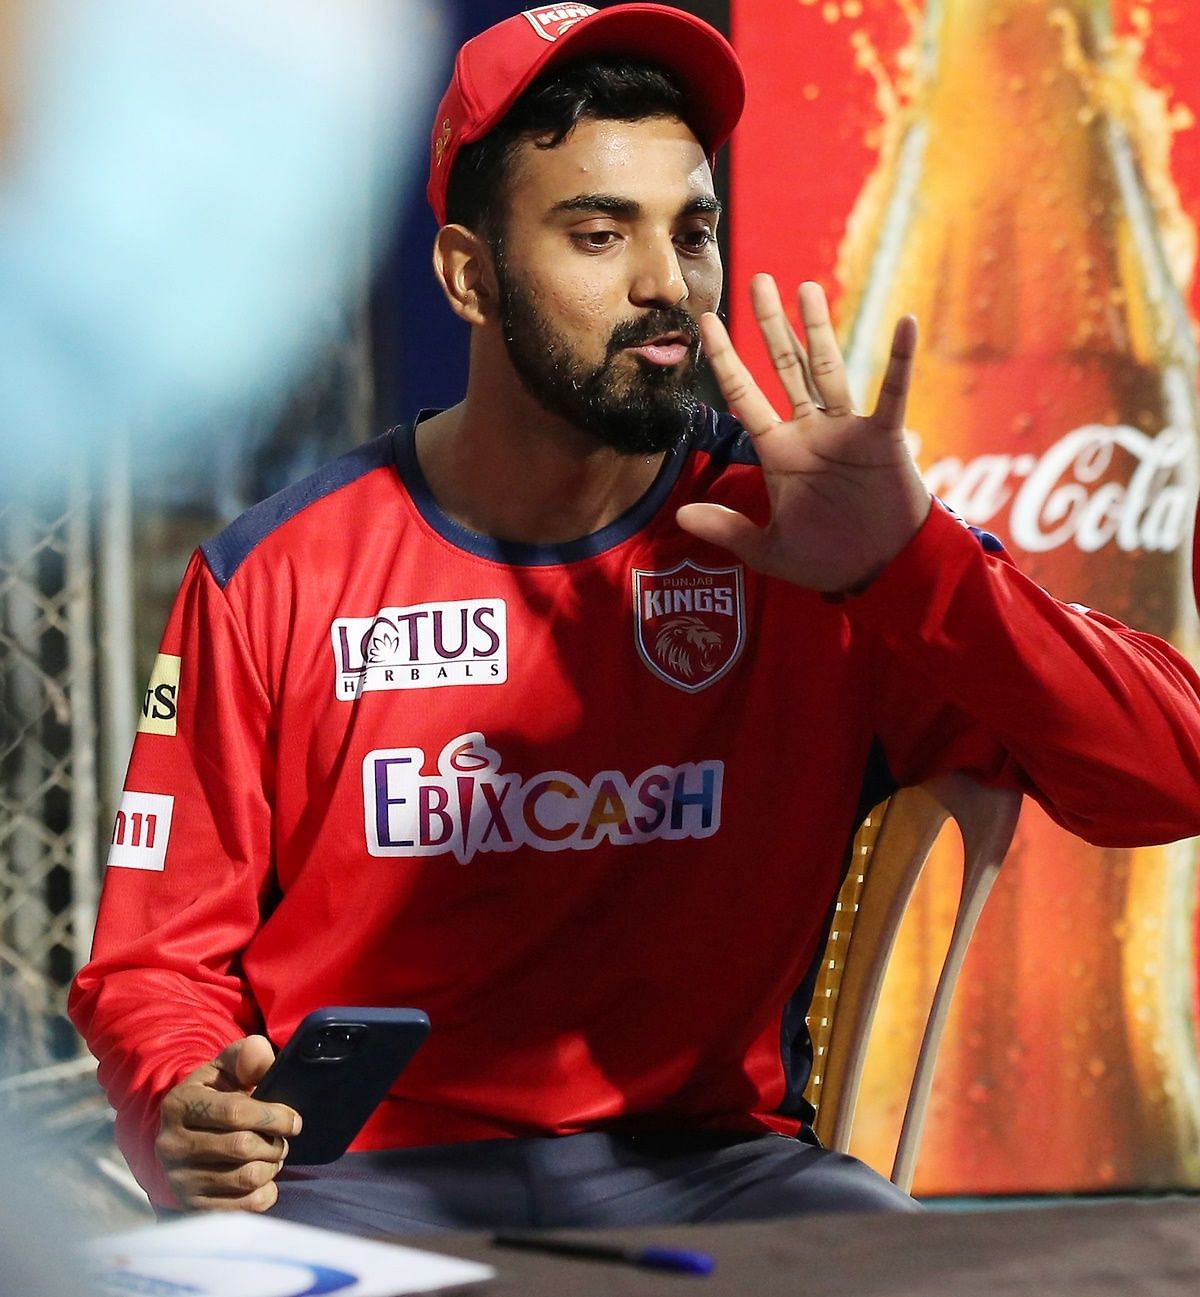 KL Rahul will have a point to prove in this edition of the IPL.